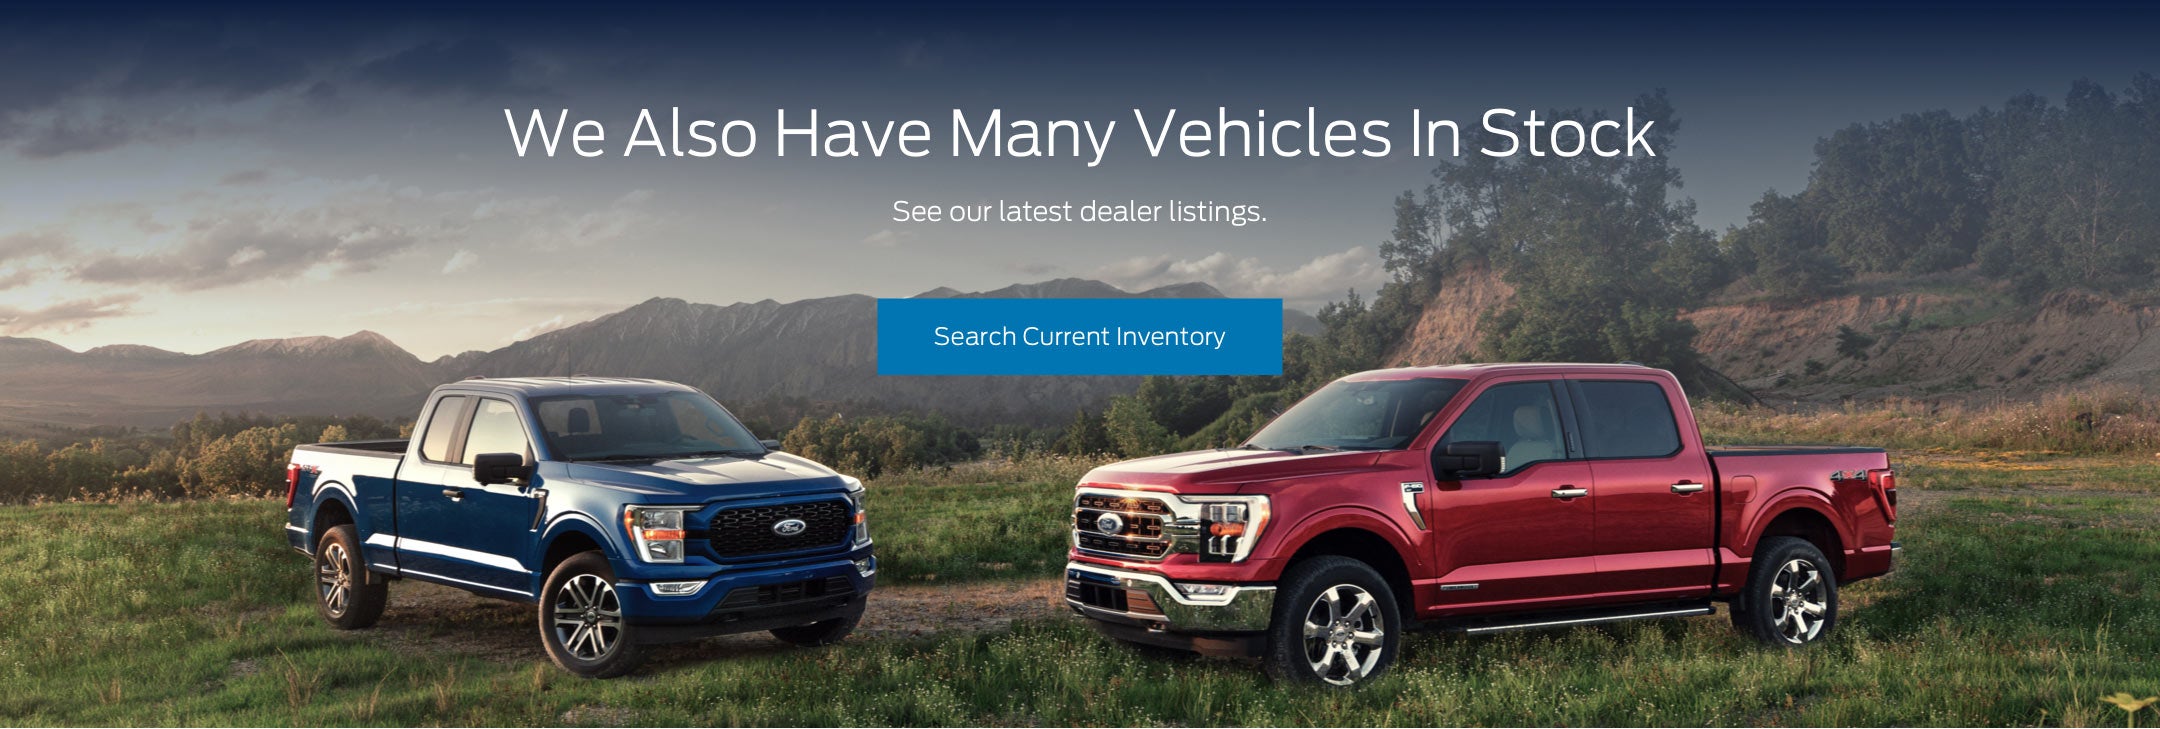 Ford vehicles in stock | Fayetteville Ford in Fayetteville GA